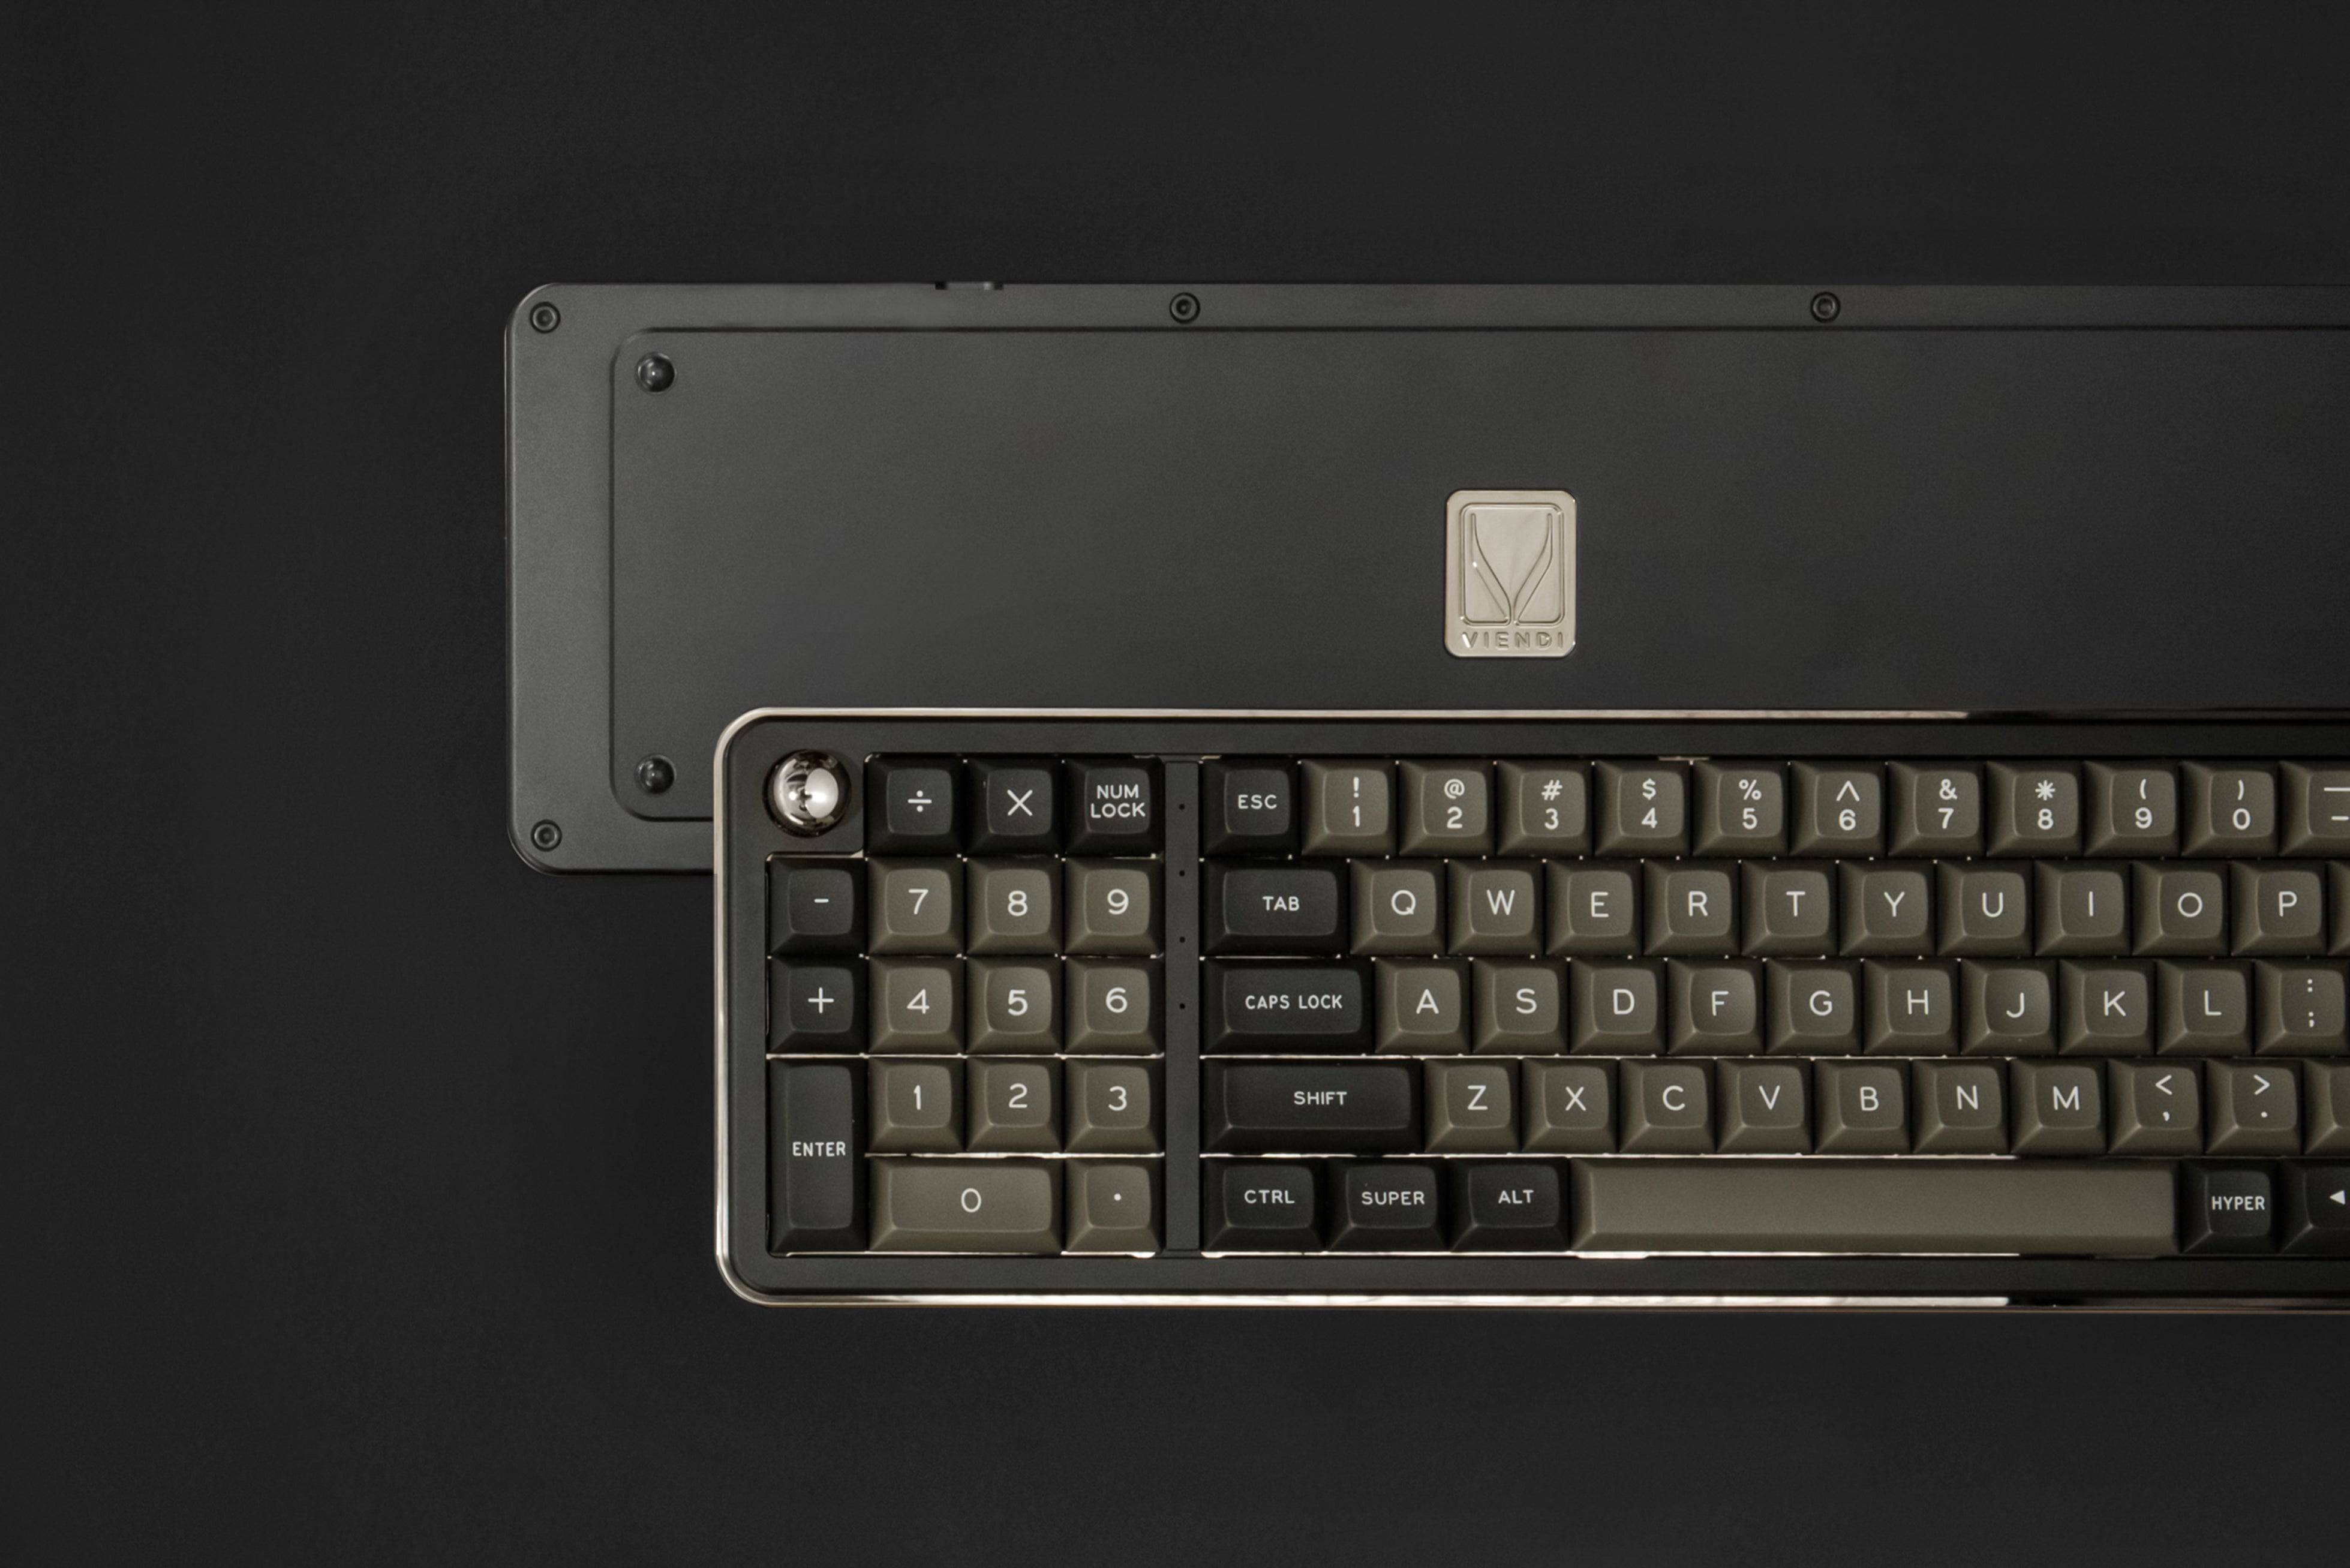 Viendi 8L keyboard and back plate shown in the Nero color variant proxied by KeebsForAll